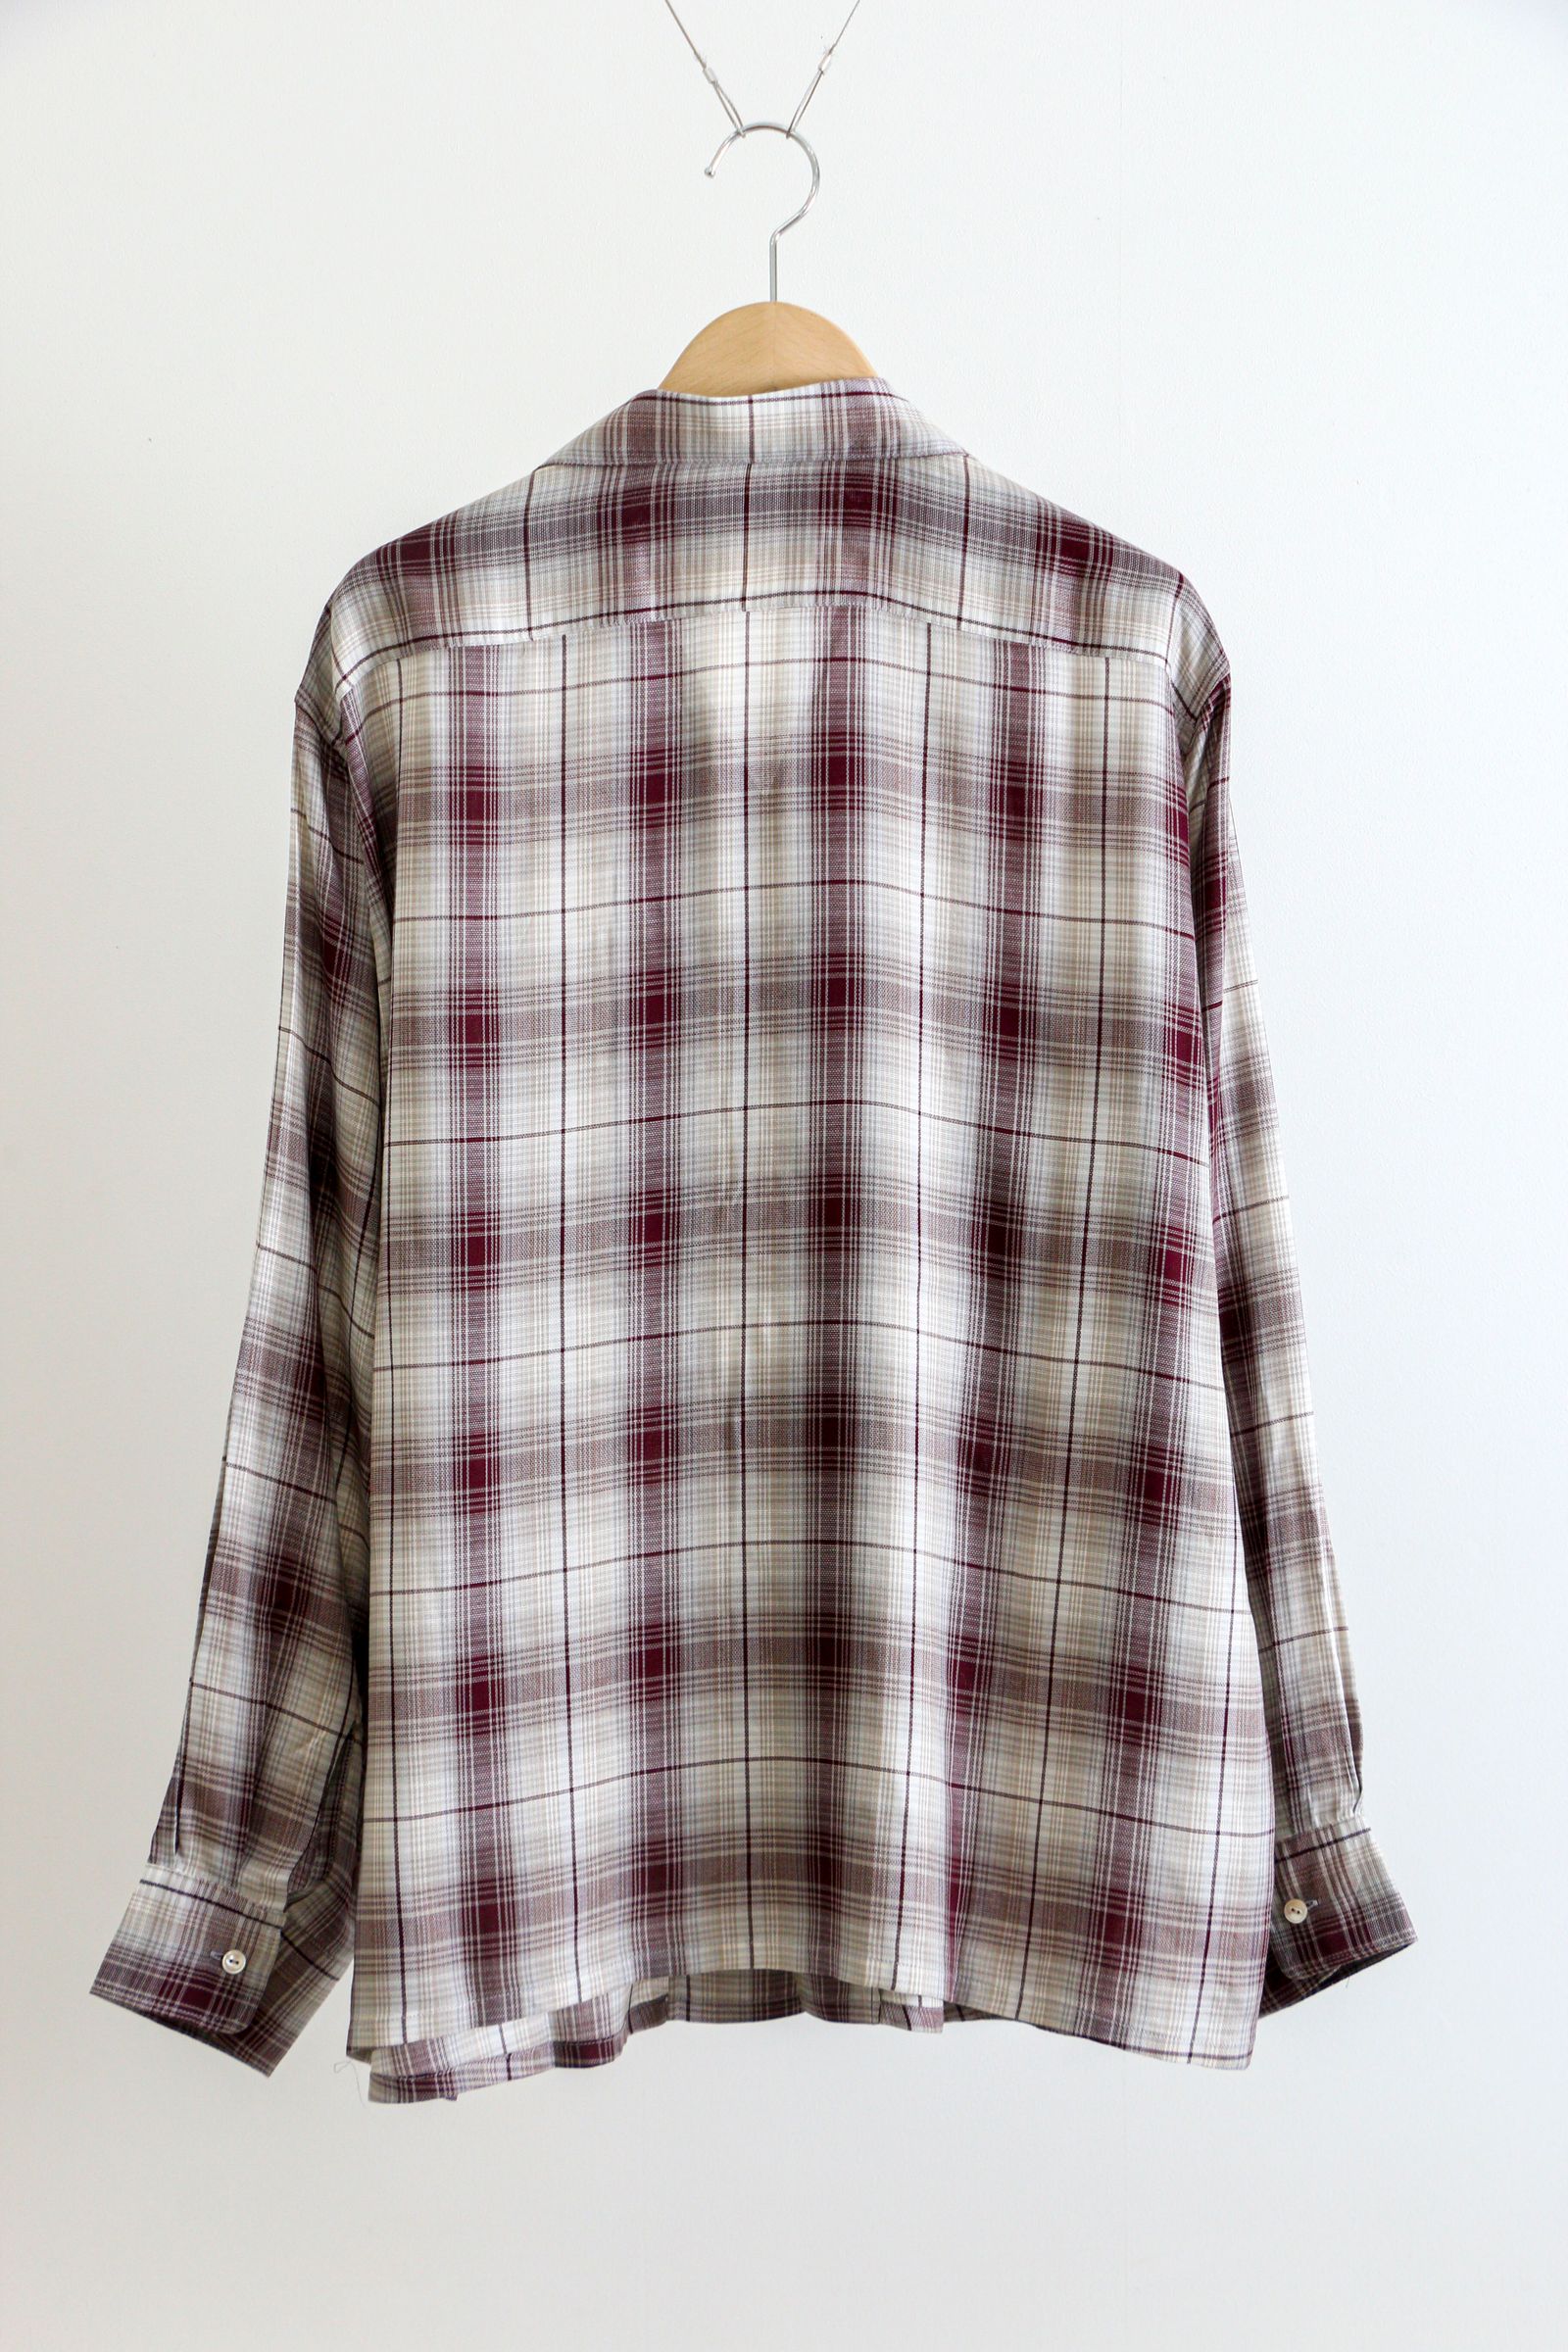 SEVEN BY SEVEN - OPEN COLLAR SHIRTS S/S - Modal panama check - RED ...